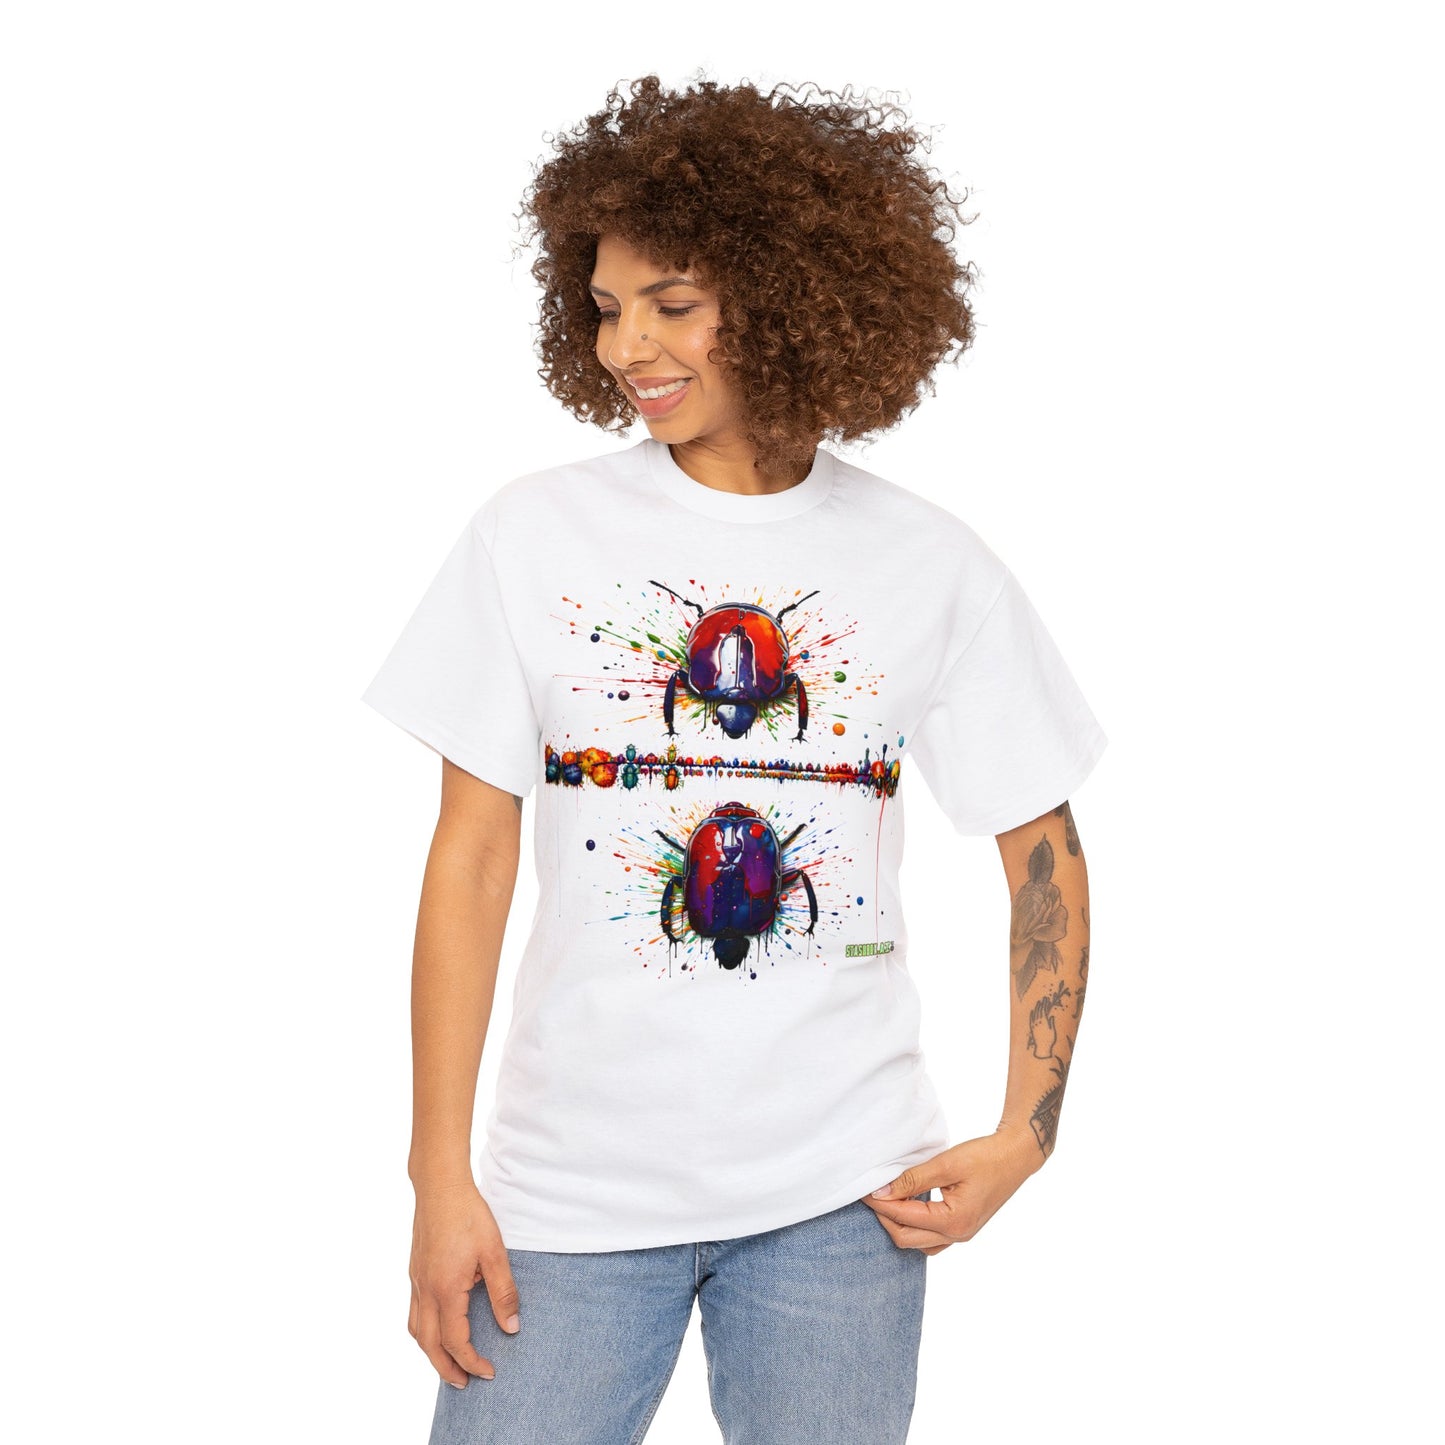 Unisex Adult Size Heavy Cotton Tee Colorful Bugs 005 T-Shirt